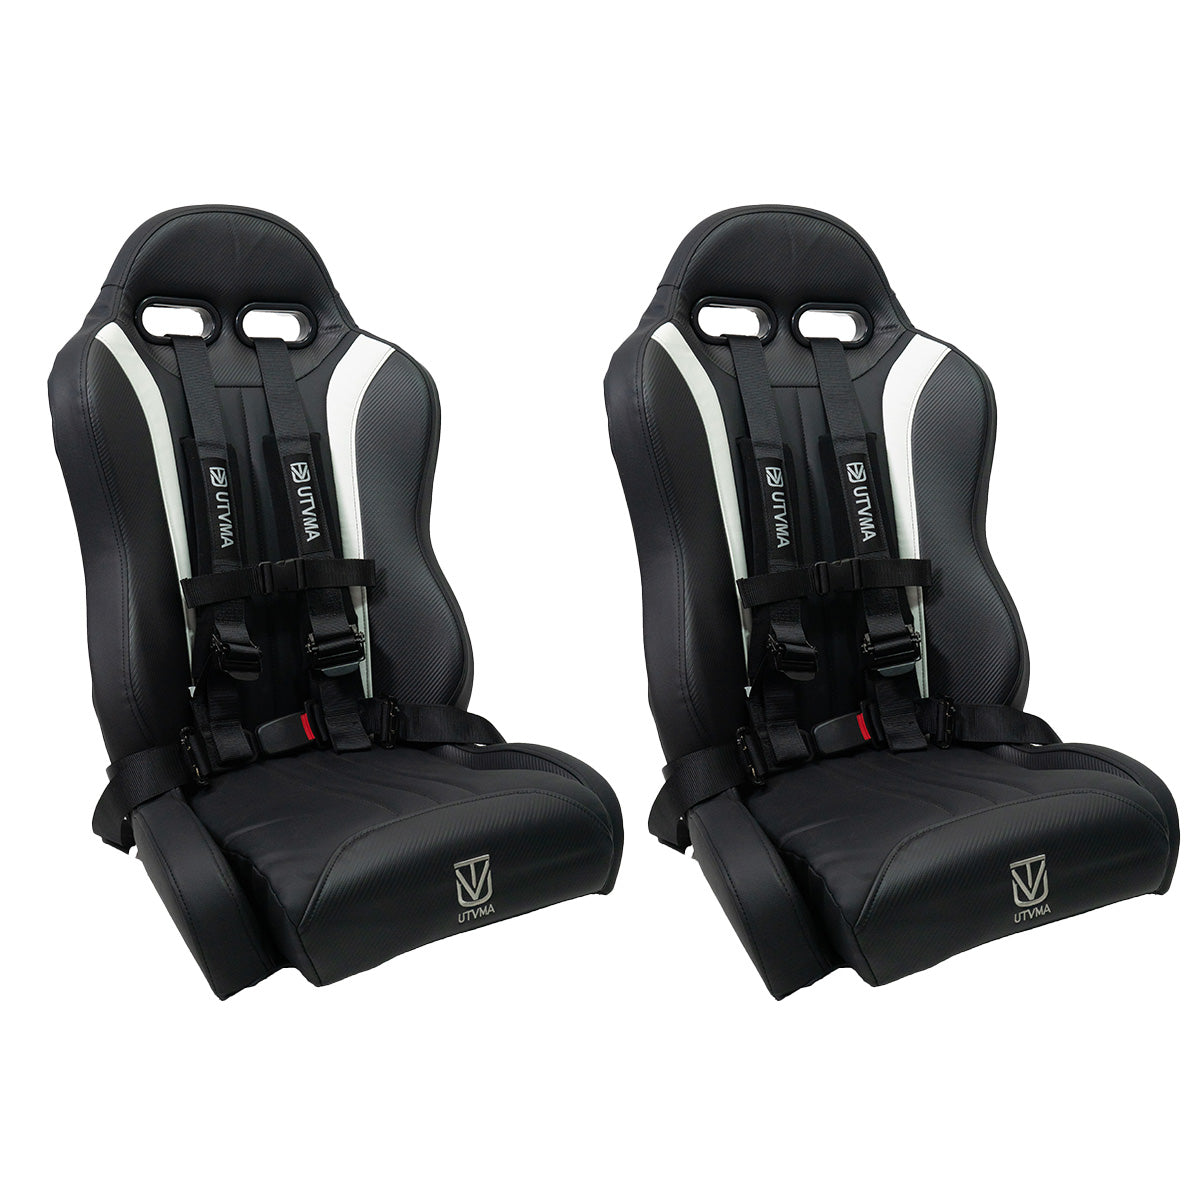 RZR PRO (Turbo R, Pro R, Pro) 2 and 4 Seater 